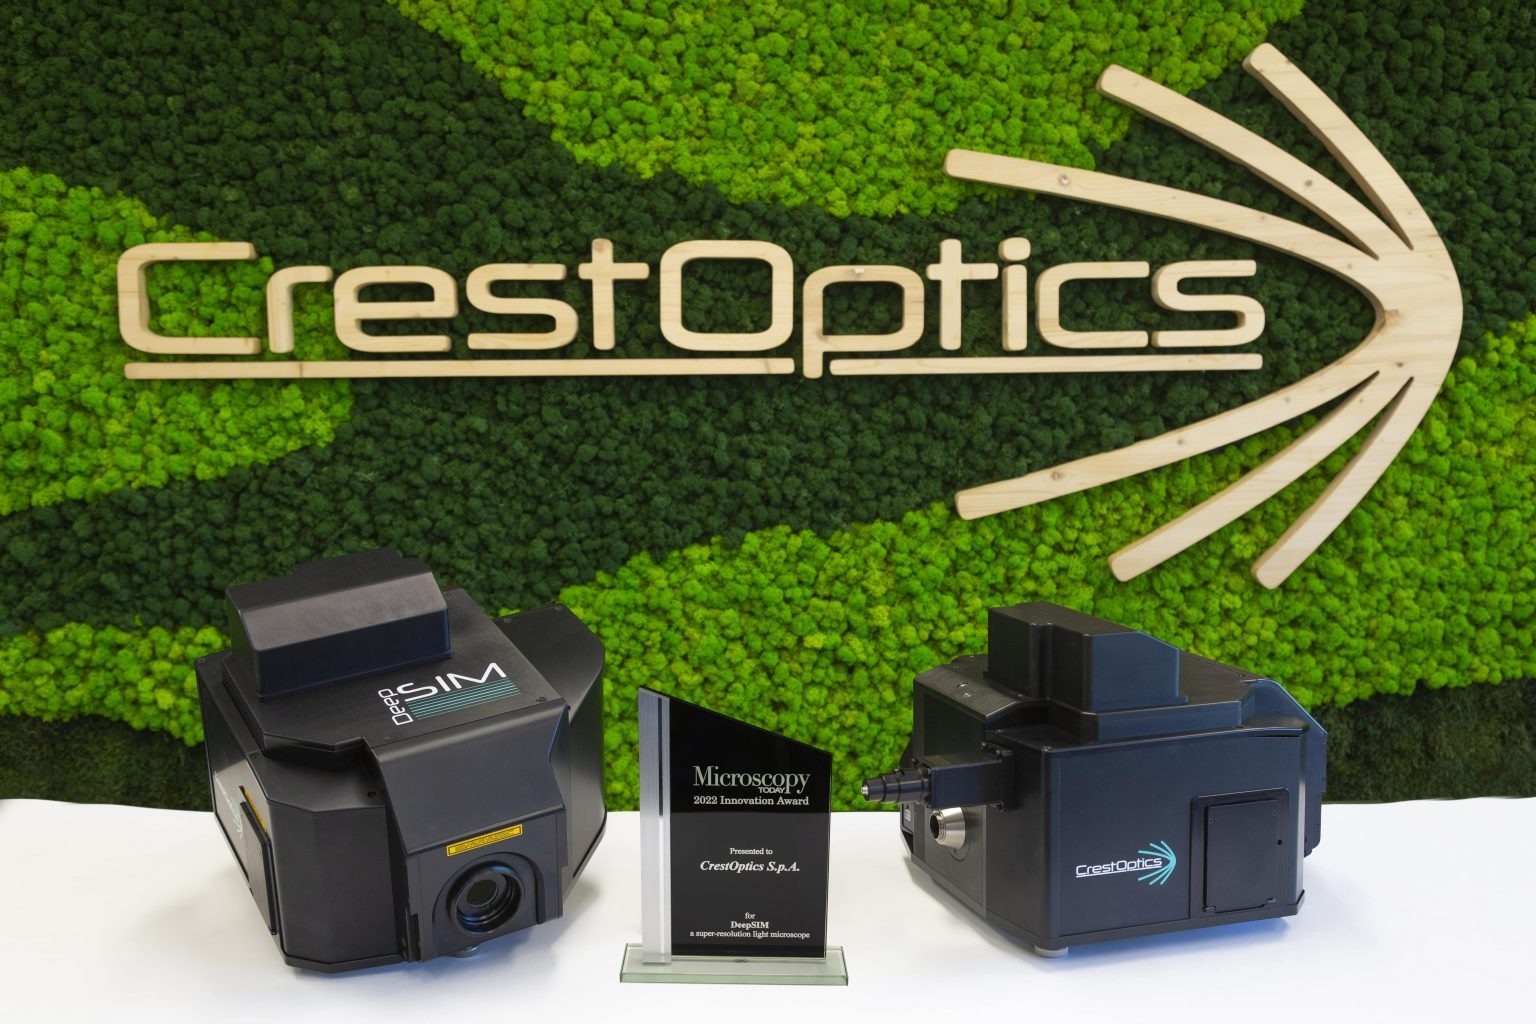 CrestOptics Launches CICERO System to Provide All-in-One Solution for Widefield and Spinning Disk Confocal Microscopy